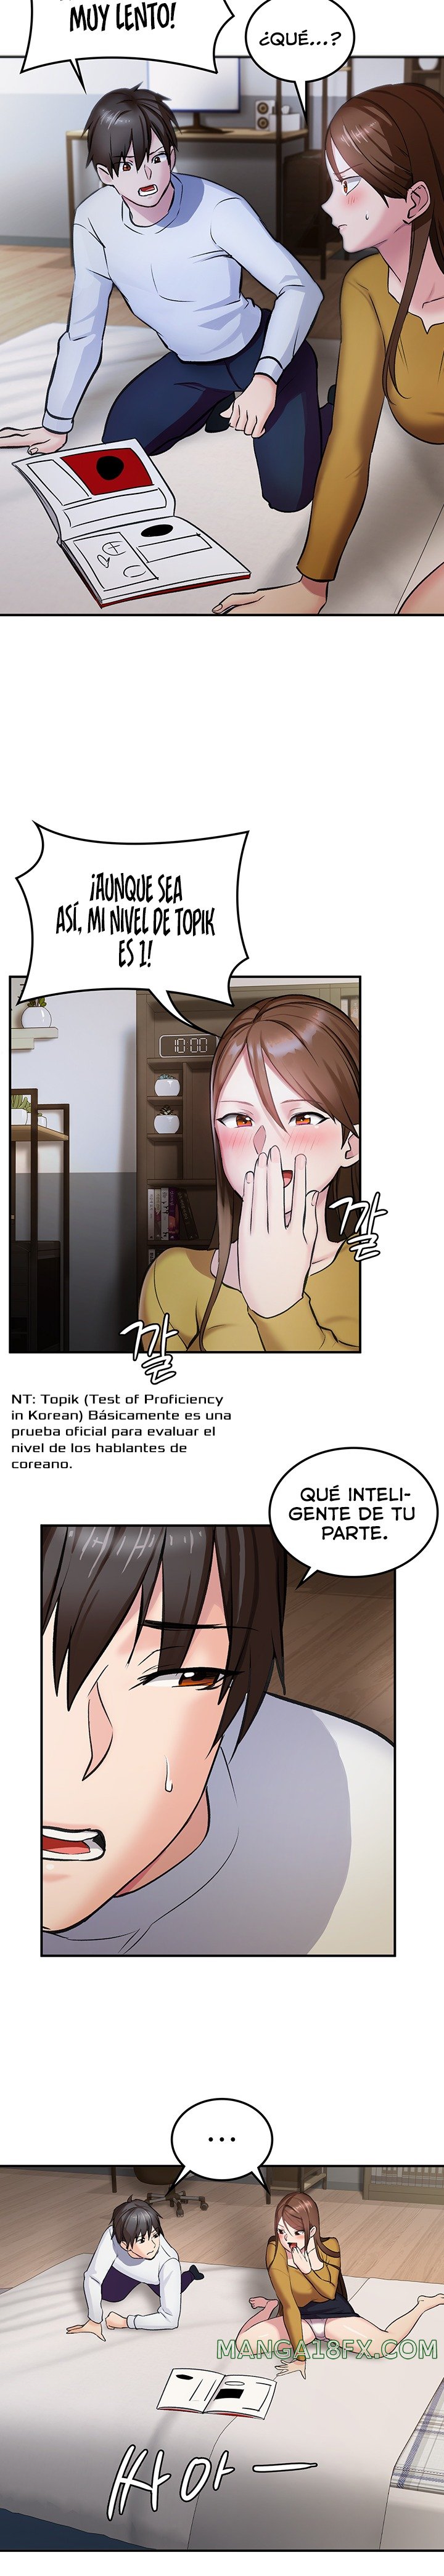 The Girl Next Door Raw - Chapter 1 Page 20